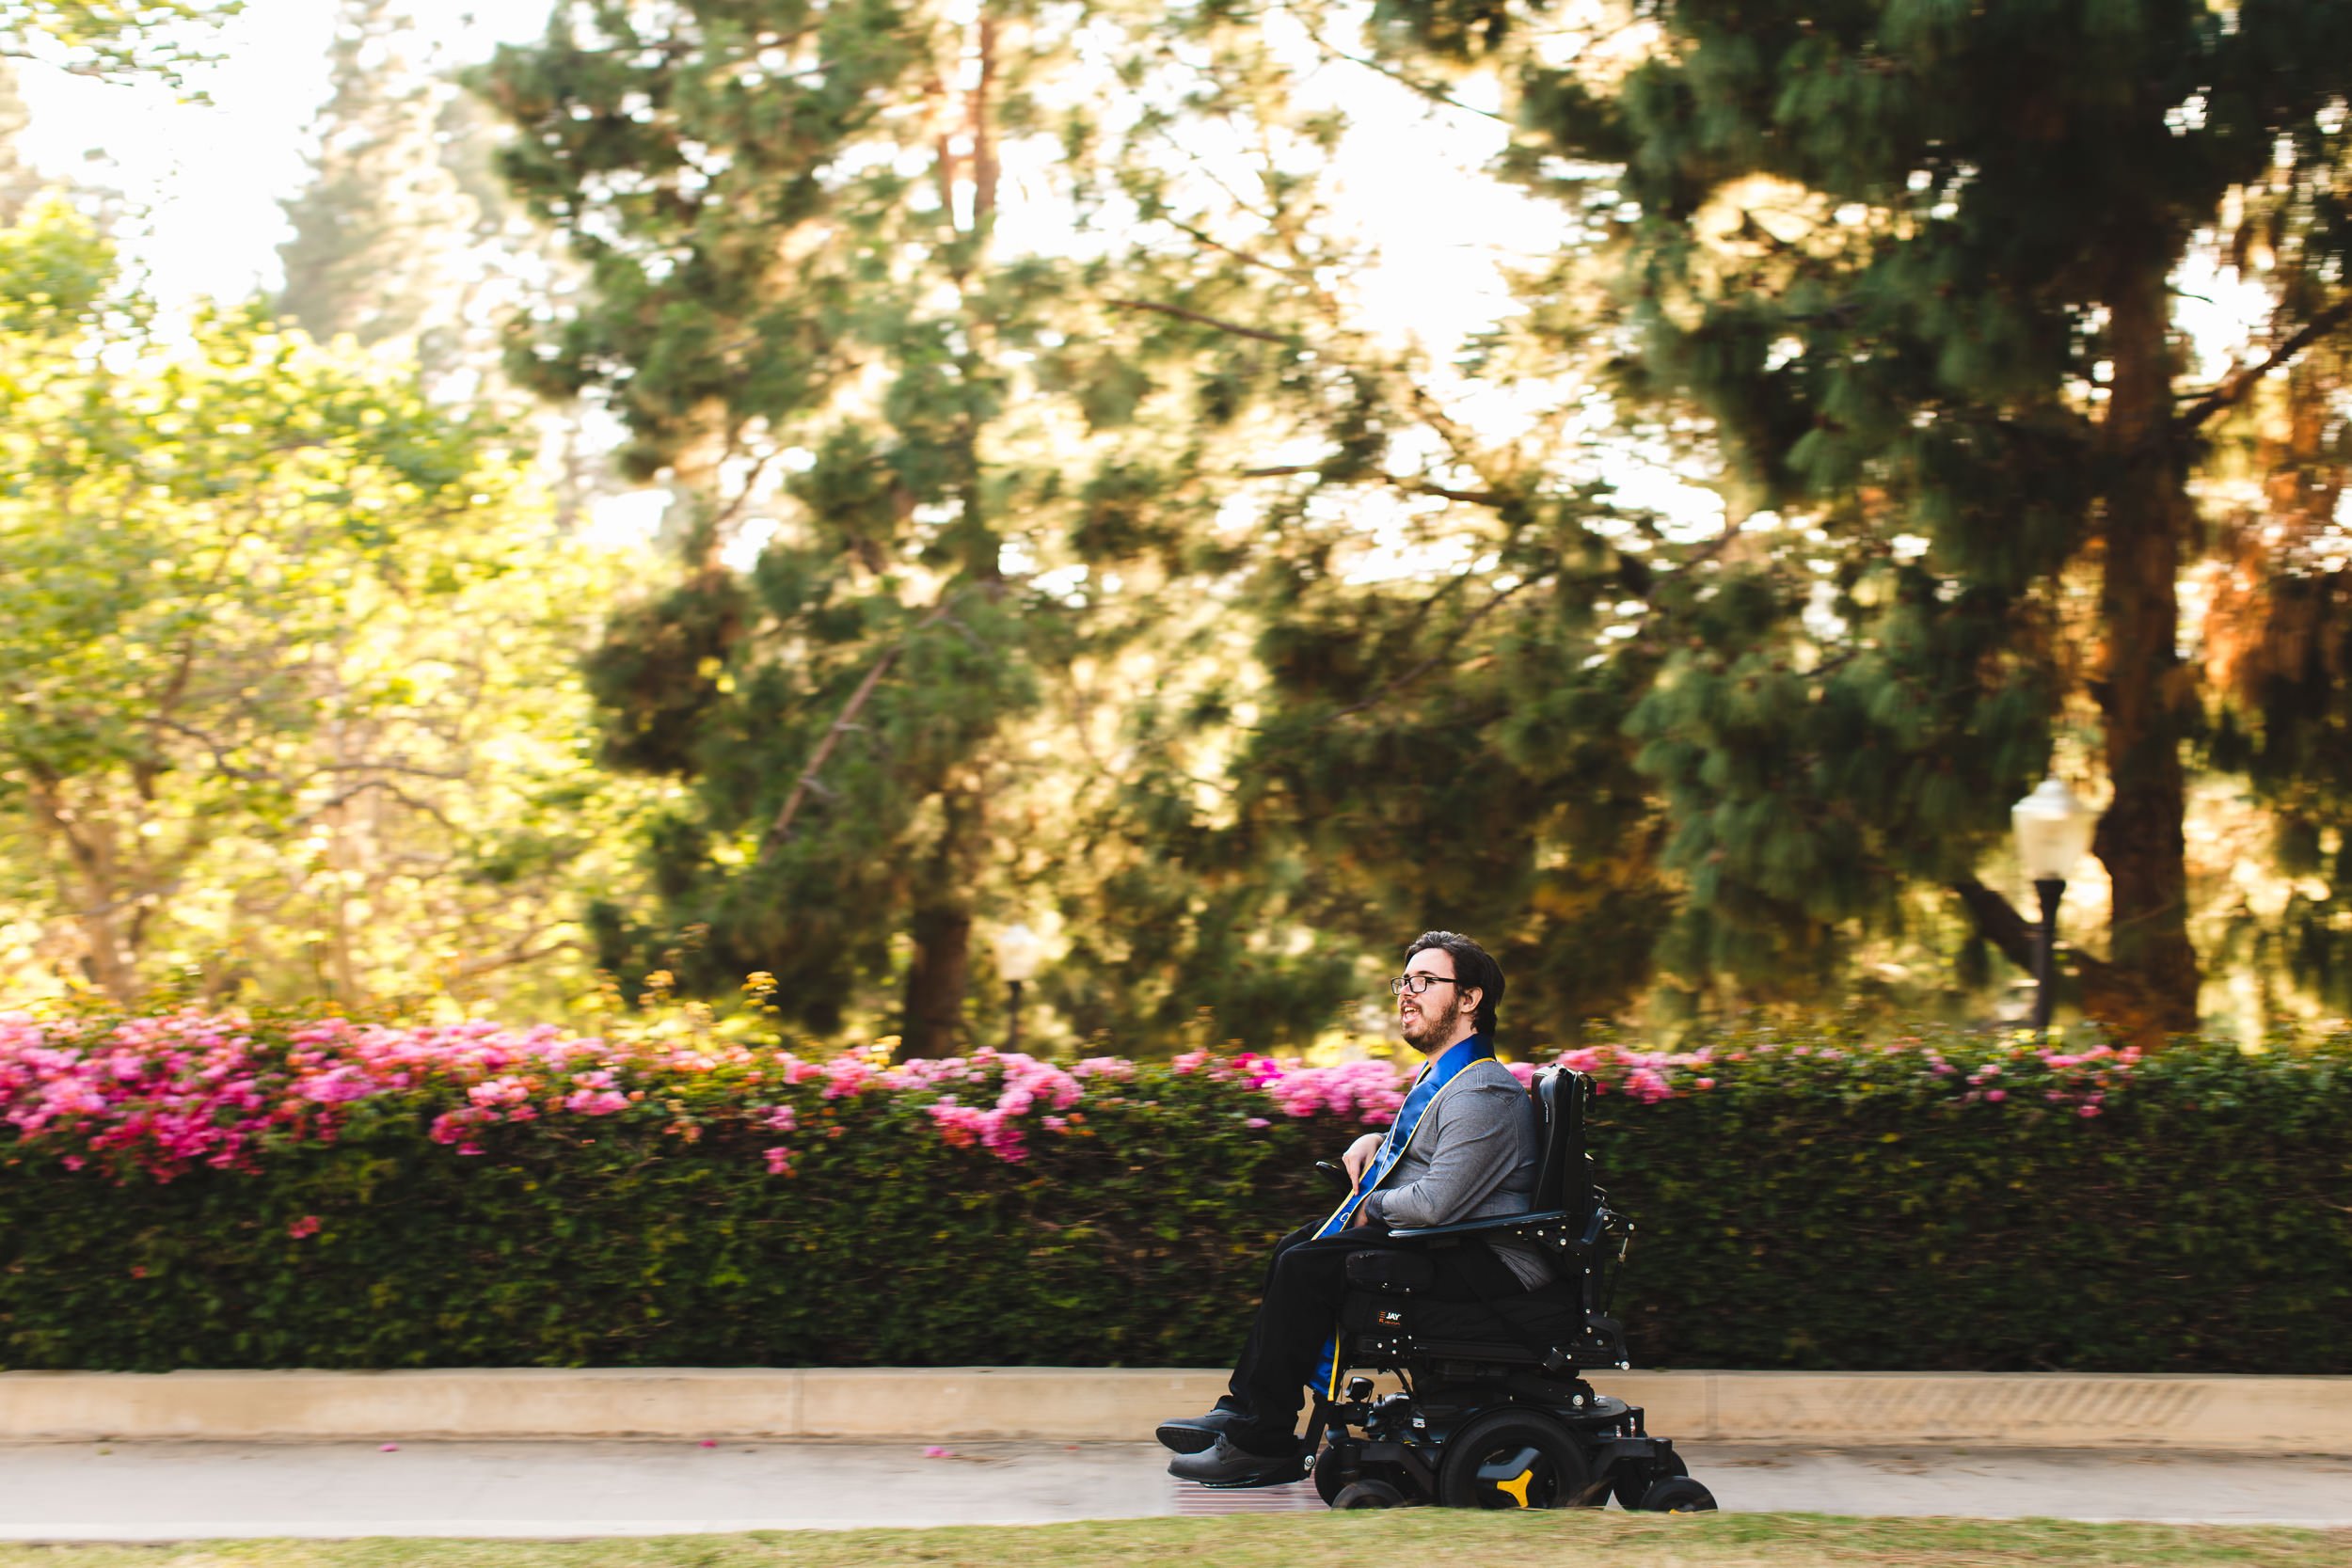 Graduation Portraits for people with disabilities, UCLA Bruin Walk Handicapped Access, Los Angeles CA. 